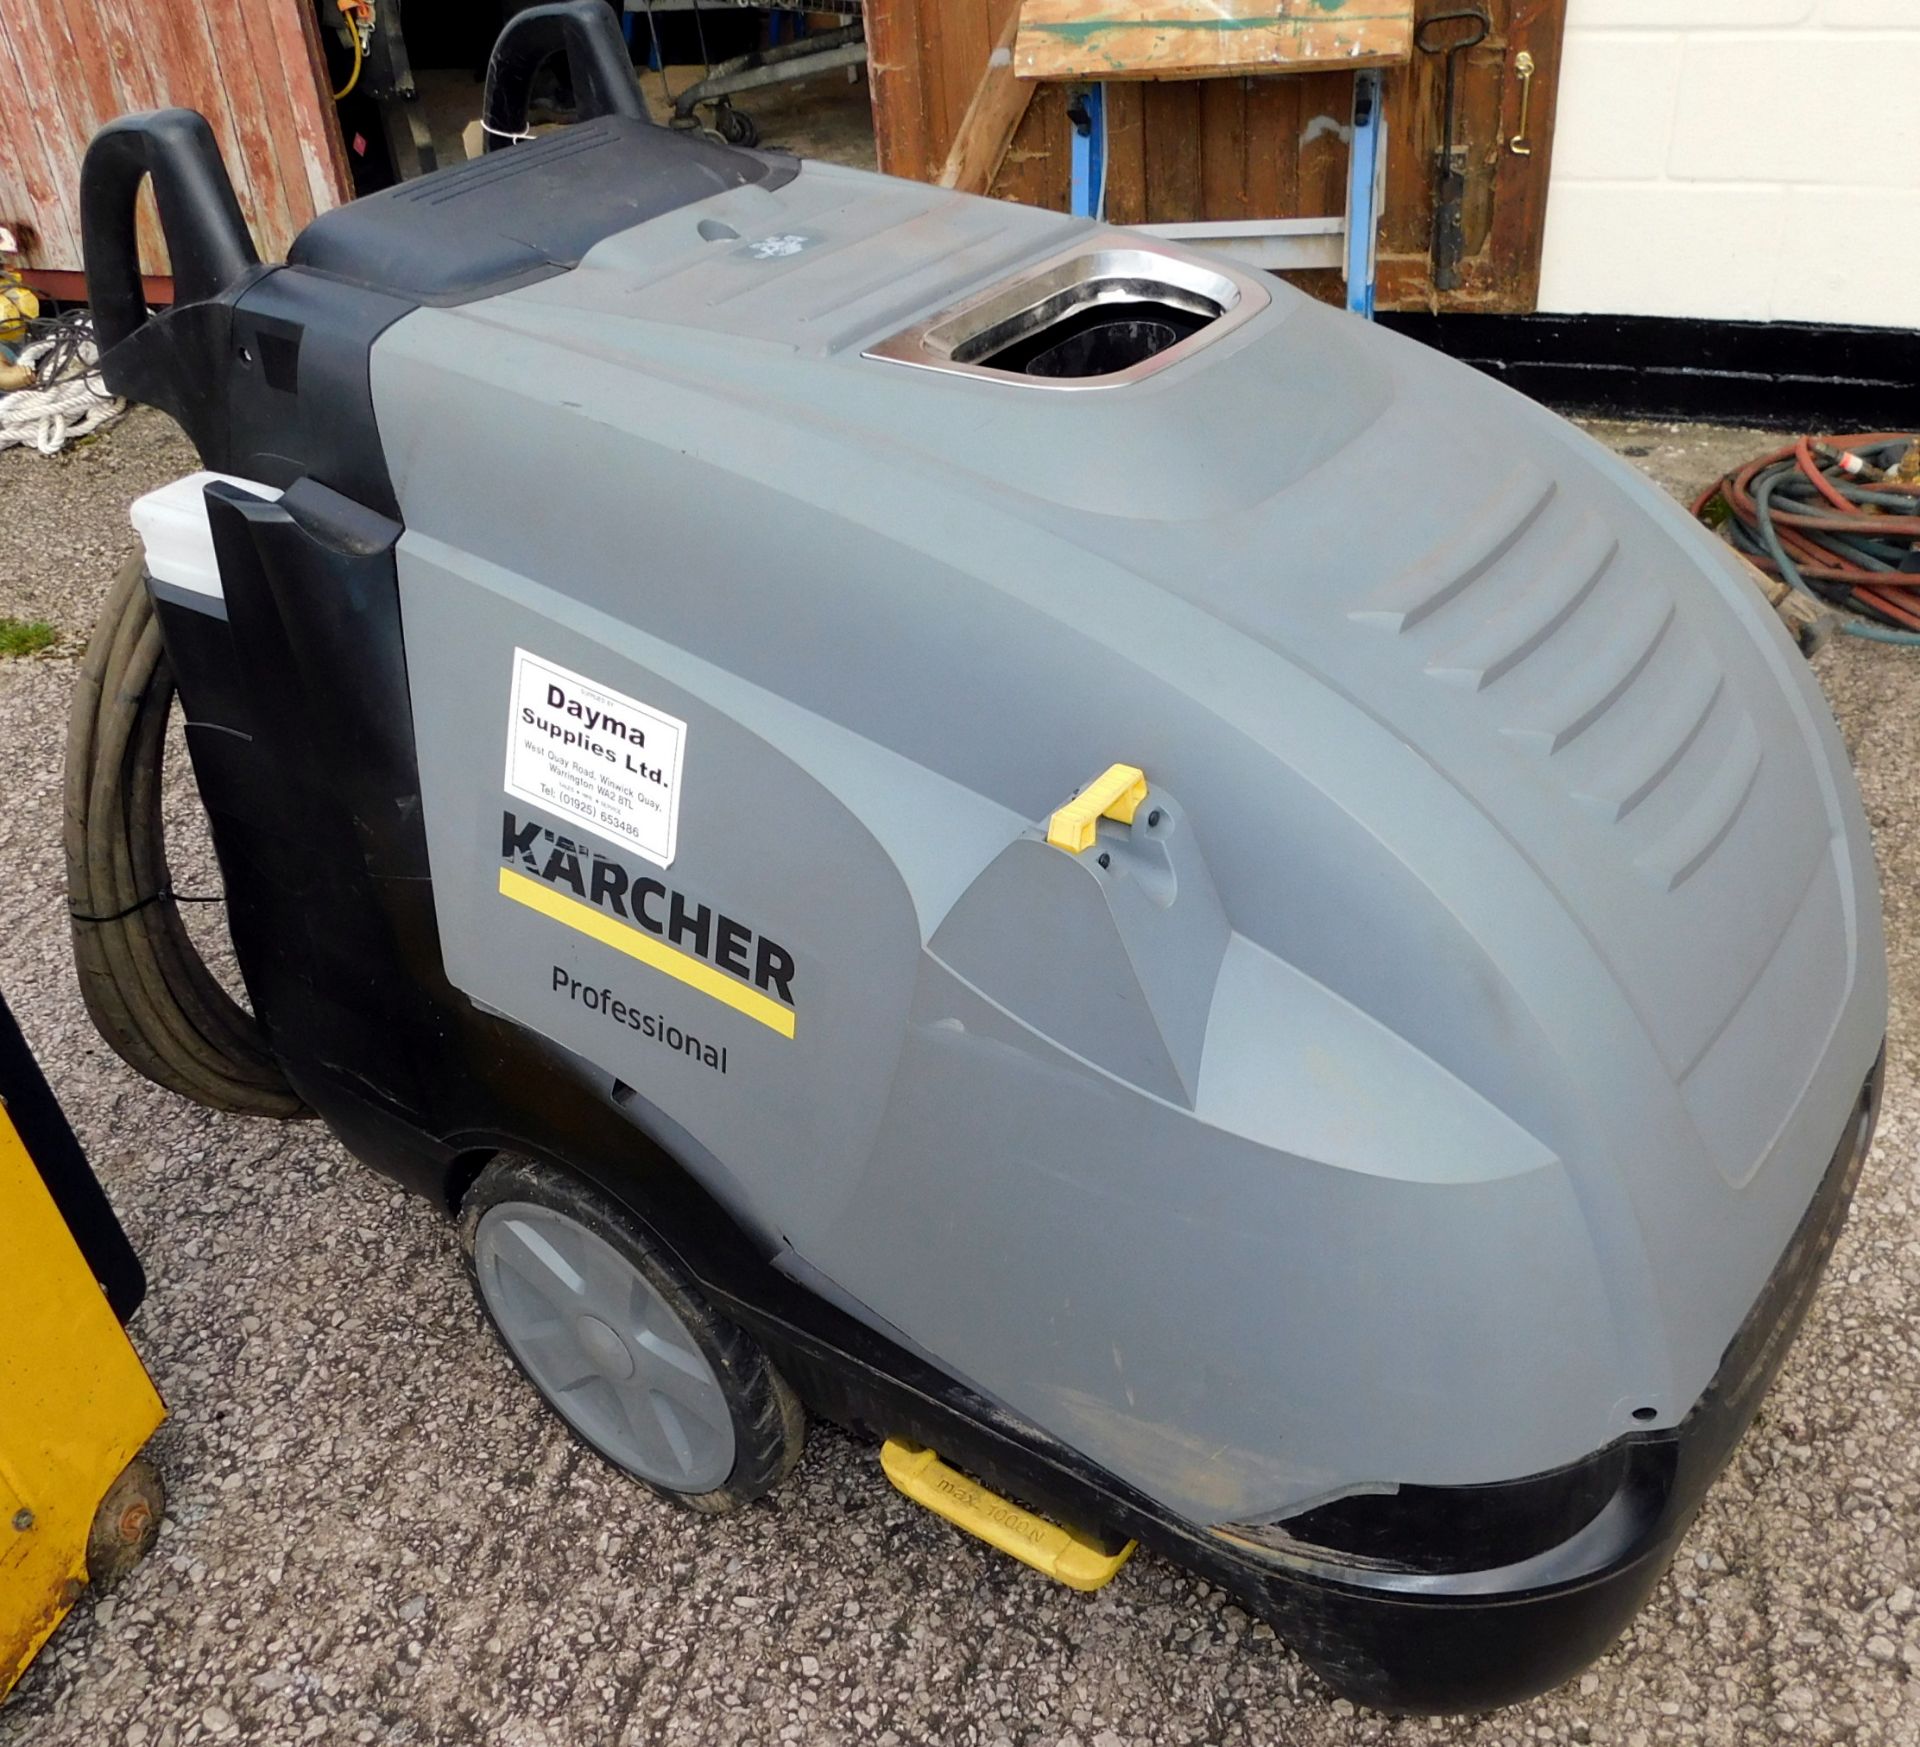 Karcher HDS7/10 4M Pressure Washer, 2014, Serial Number: 012156 (Located Warrington) - Image 3 of 7